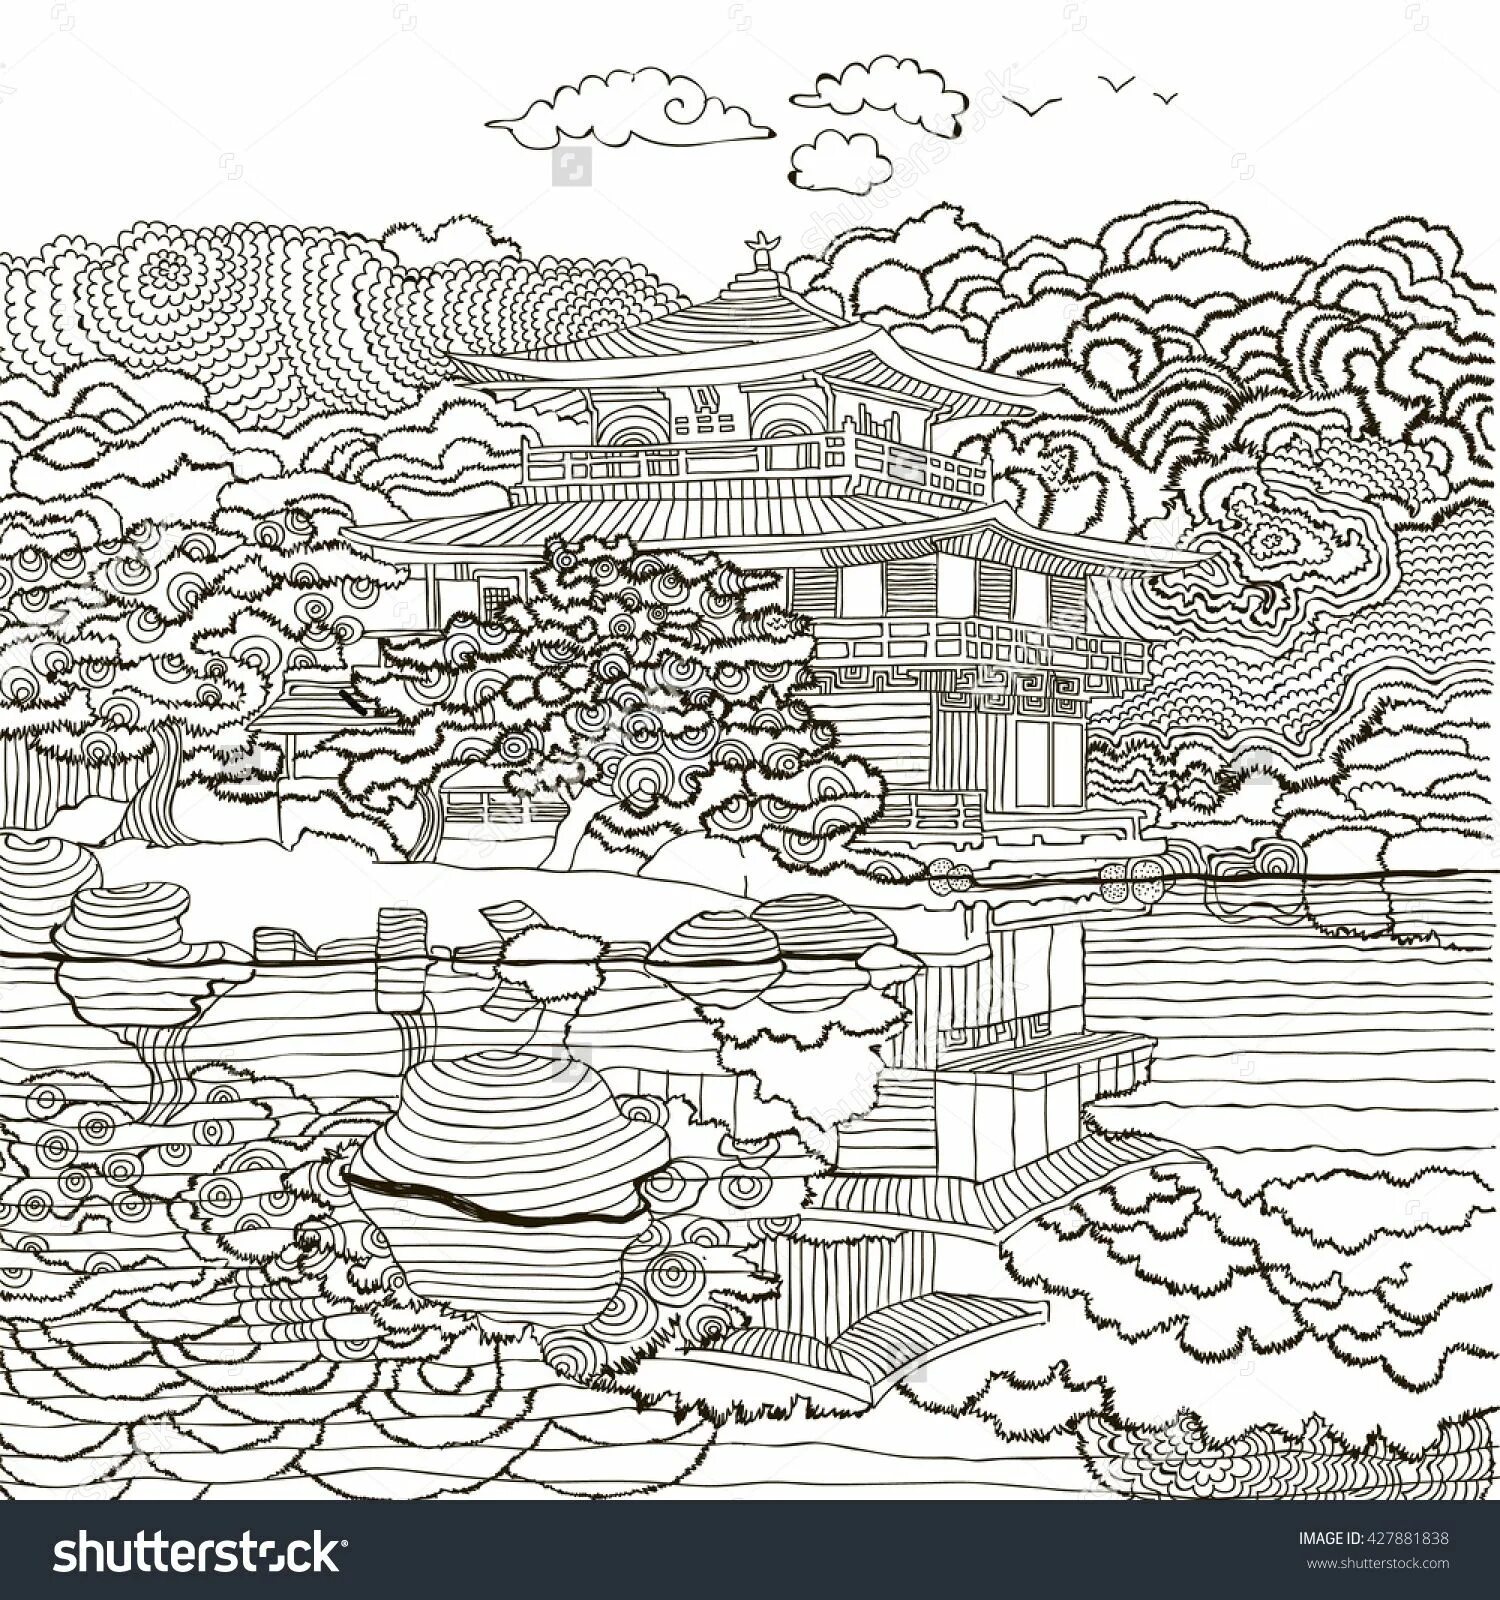 Intriguing coloring book with Chinese motifs